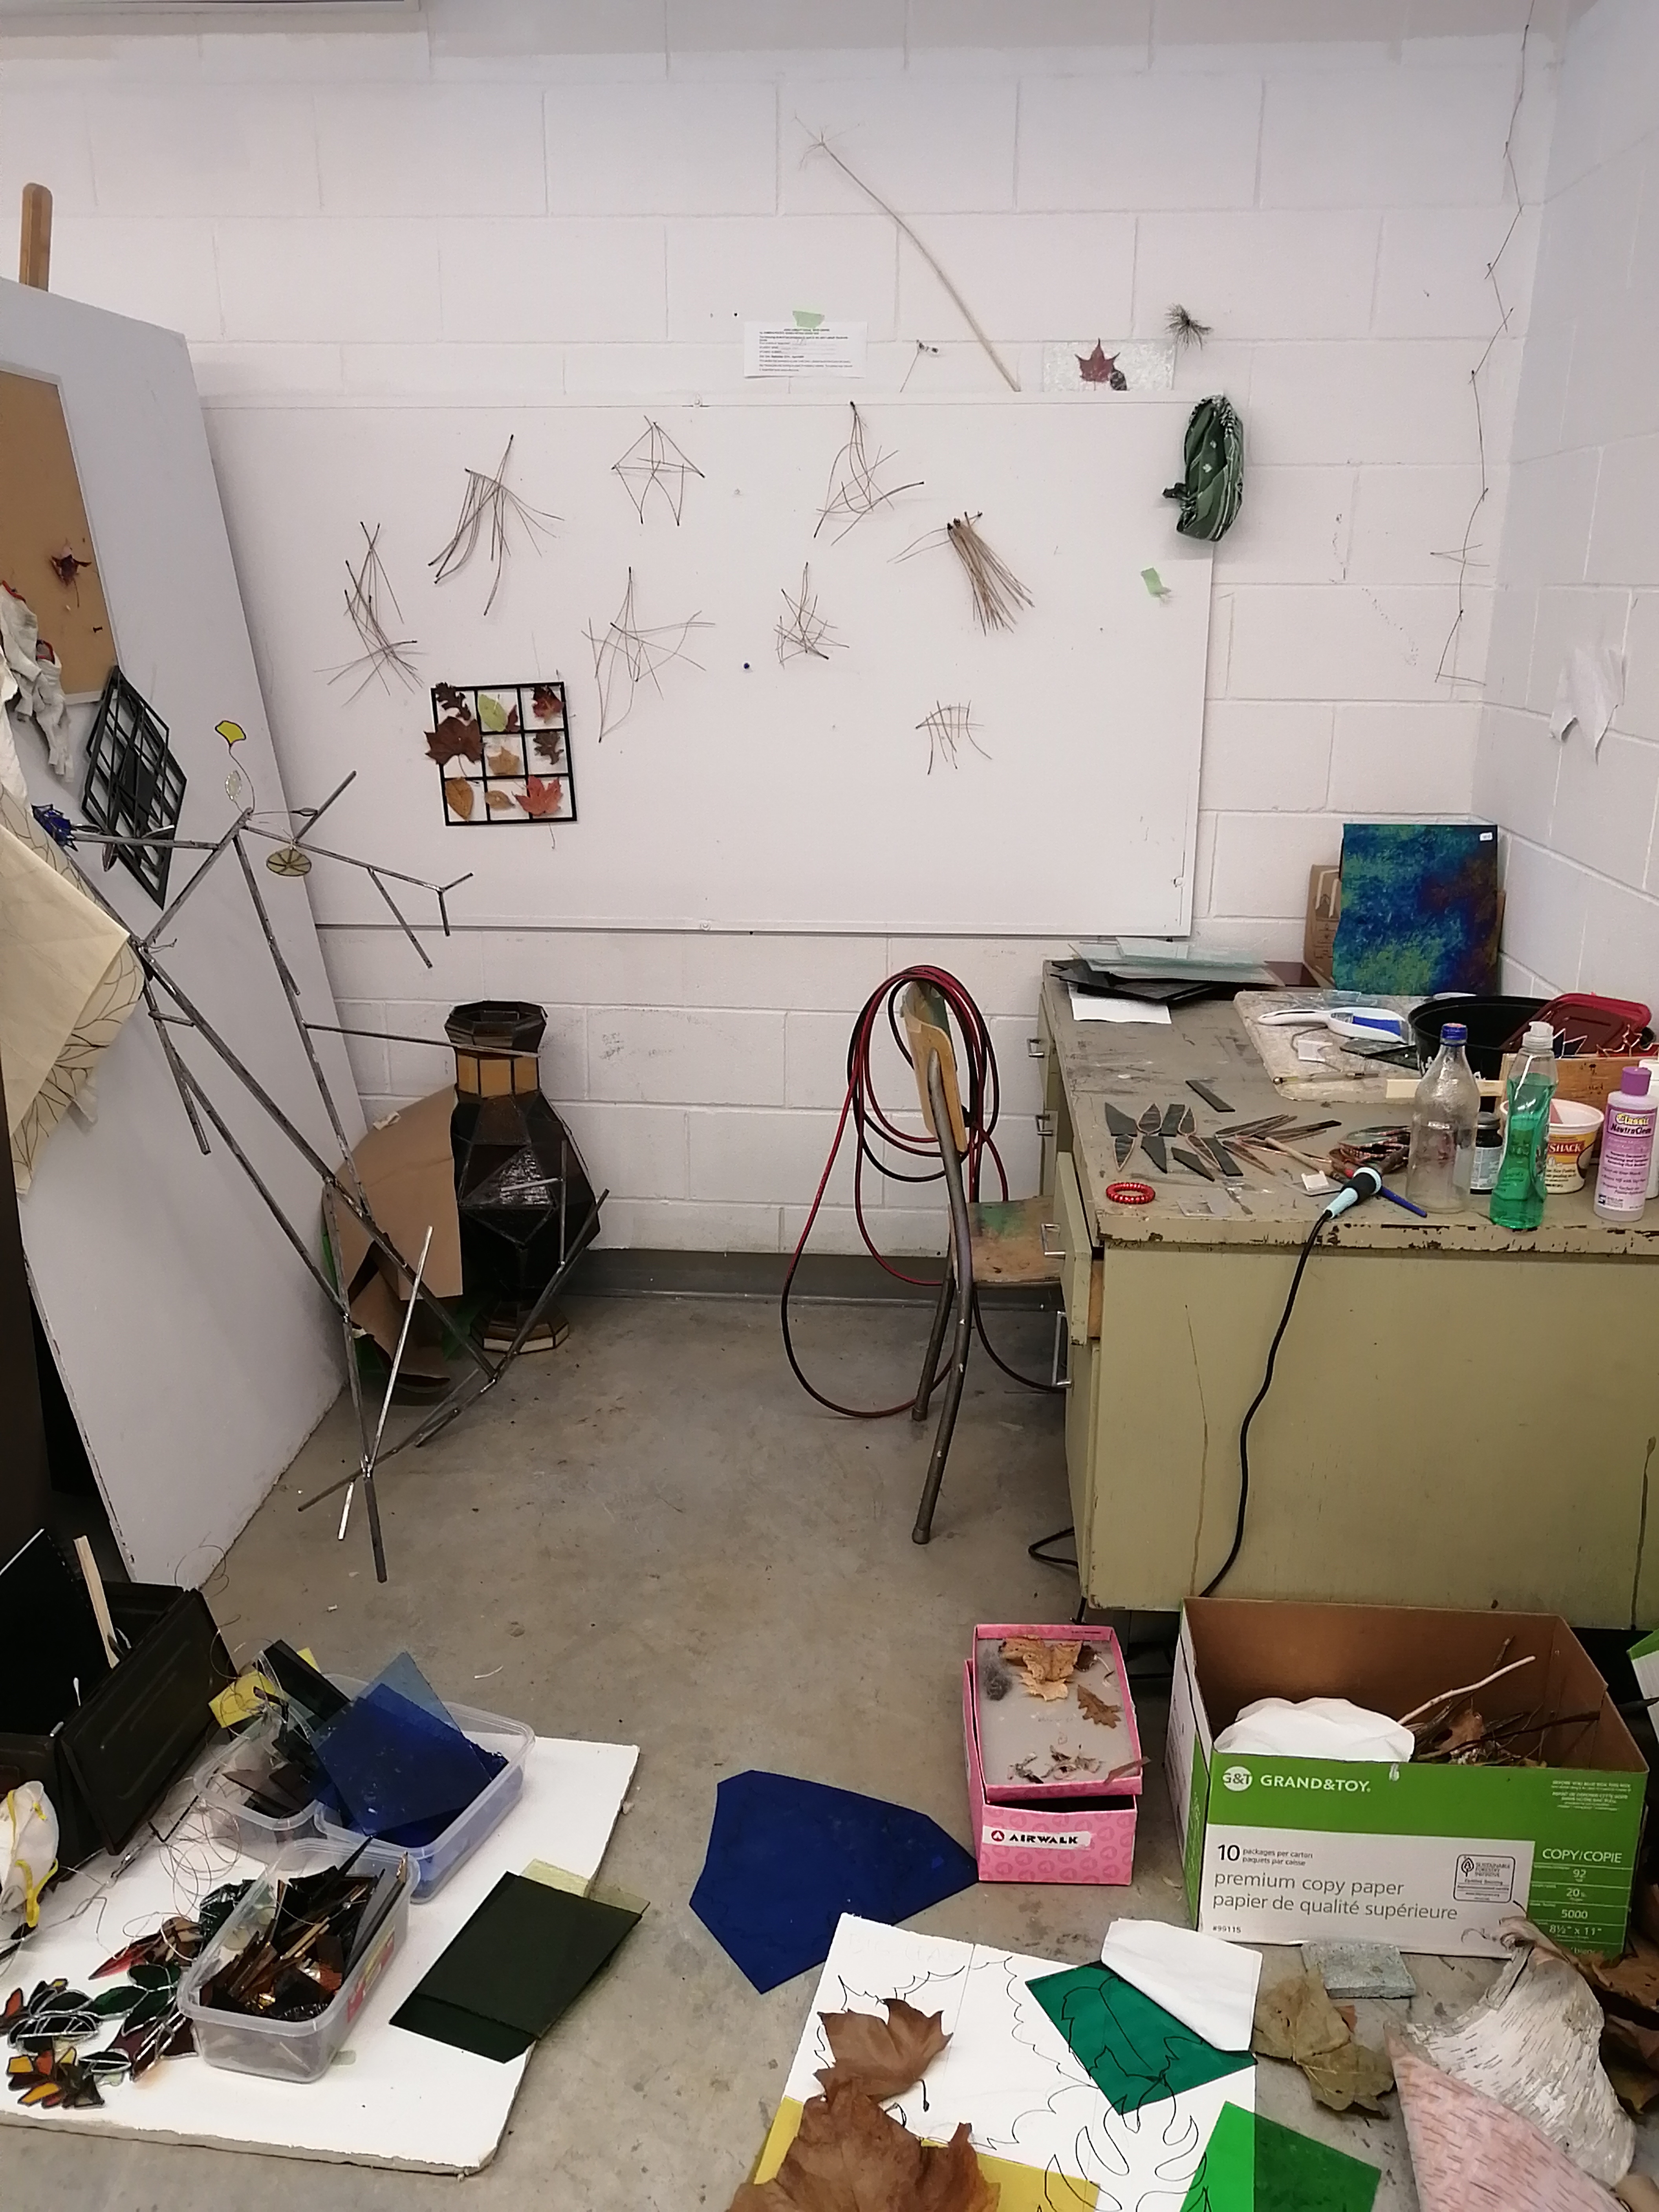 Photo of a studio space with boxes and pieces of glass organized neatly.